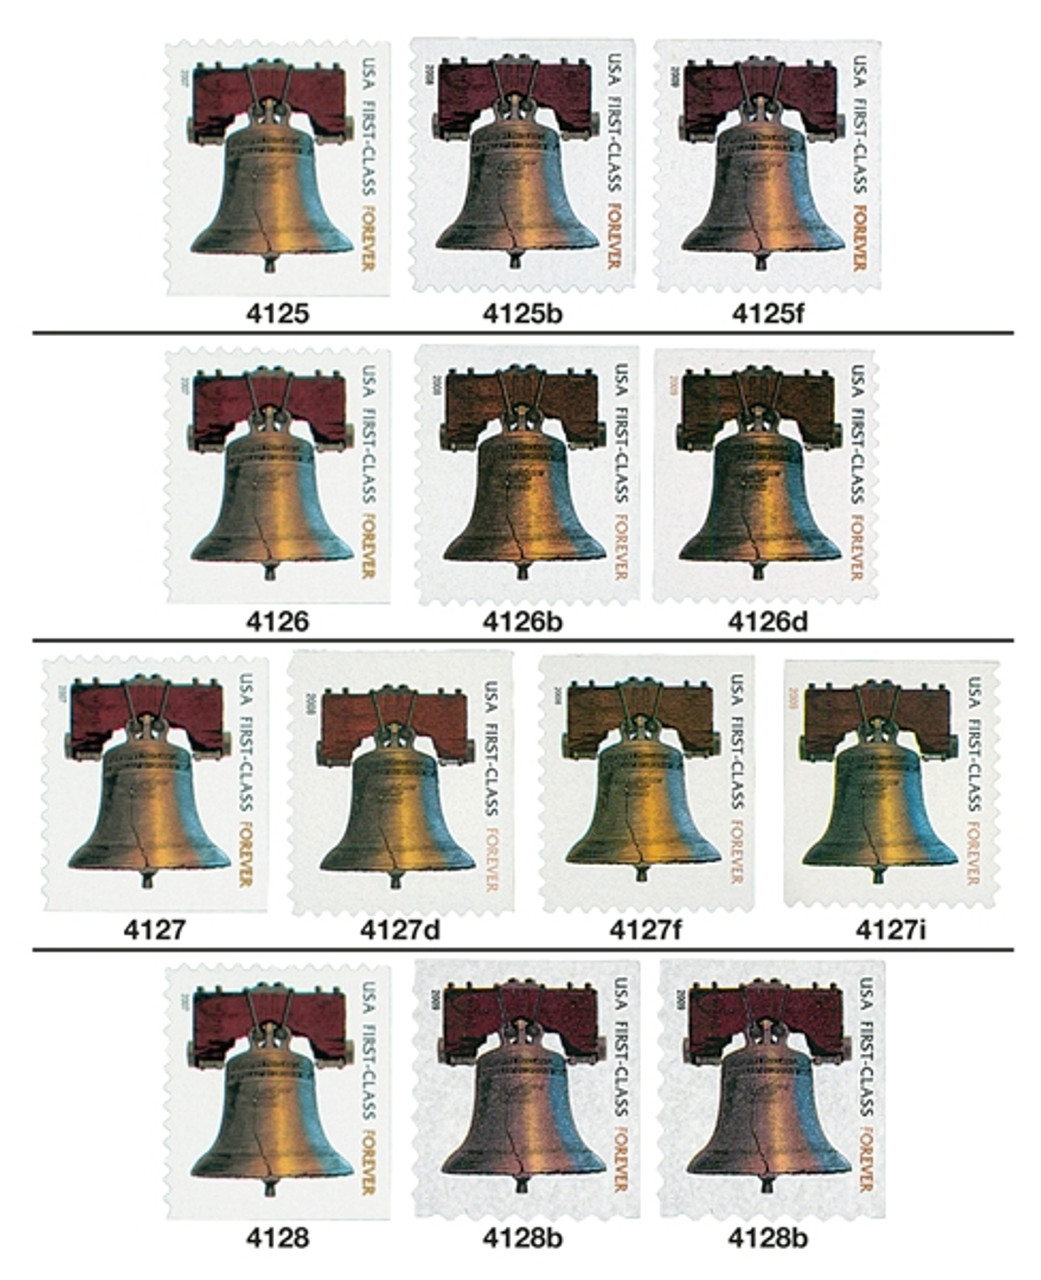 13 Forever Stamps, 1 $26.35 Stamp, 3 $5 Stamps and 16 Global